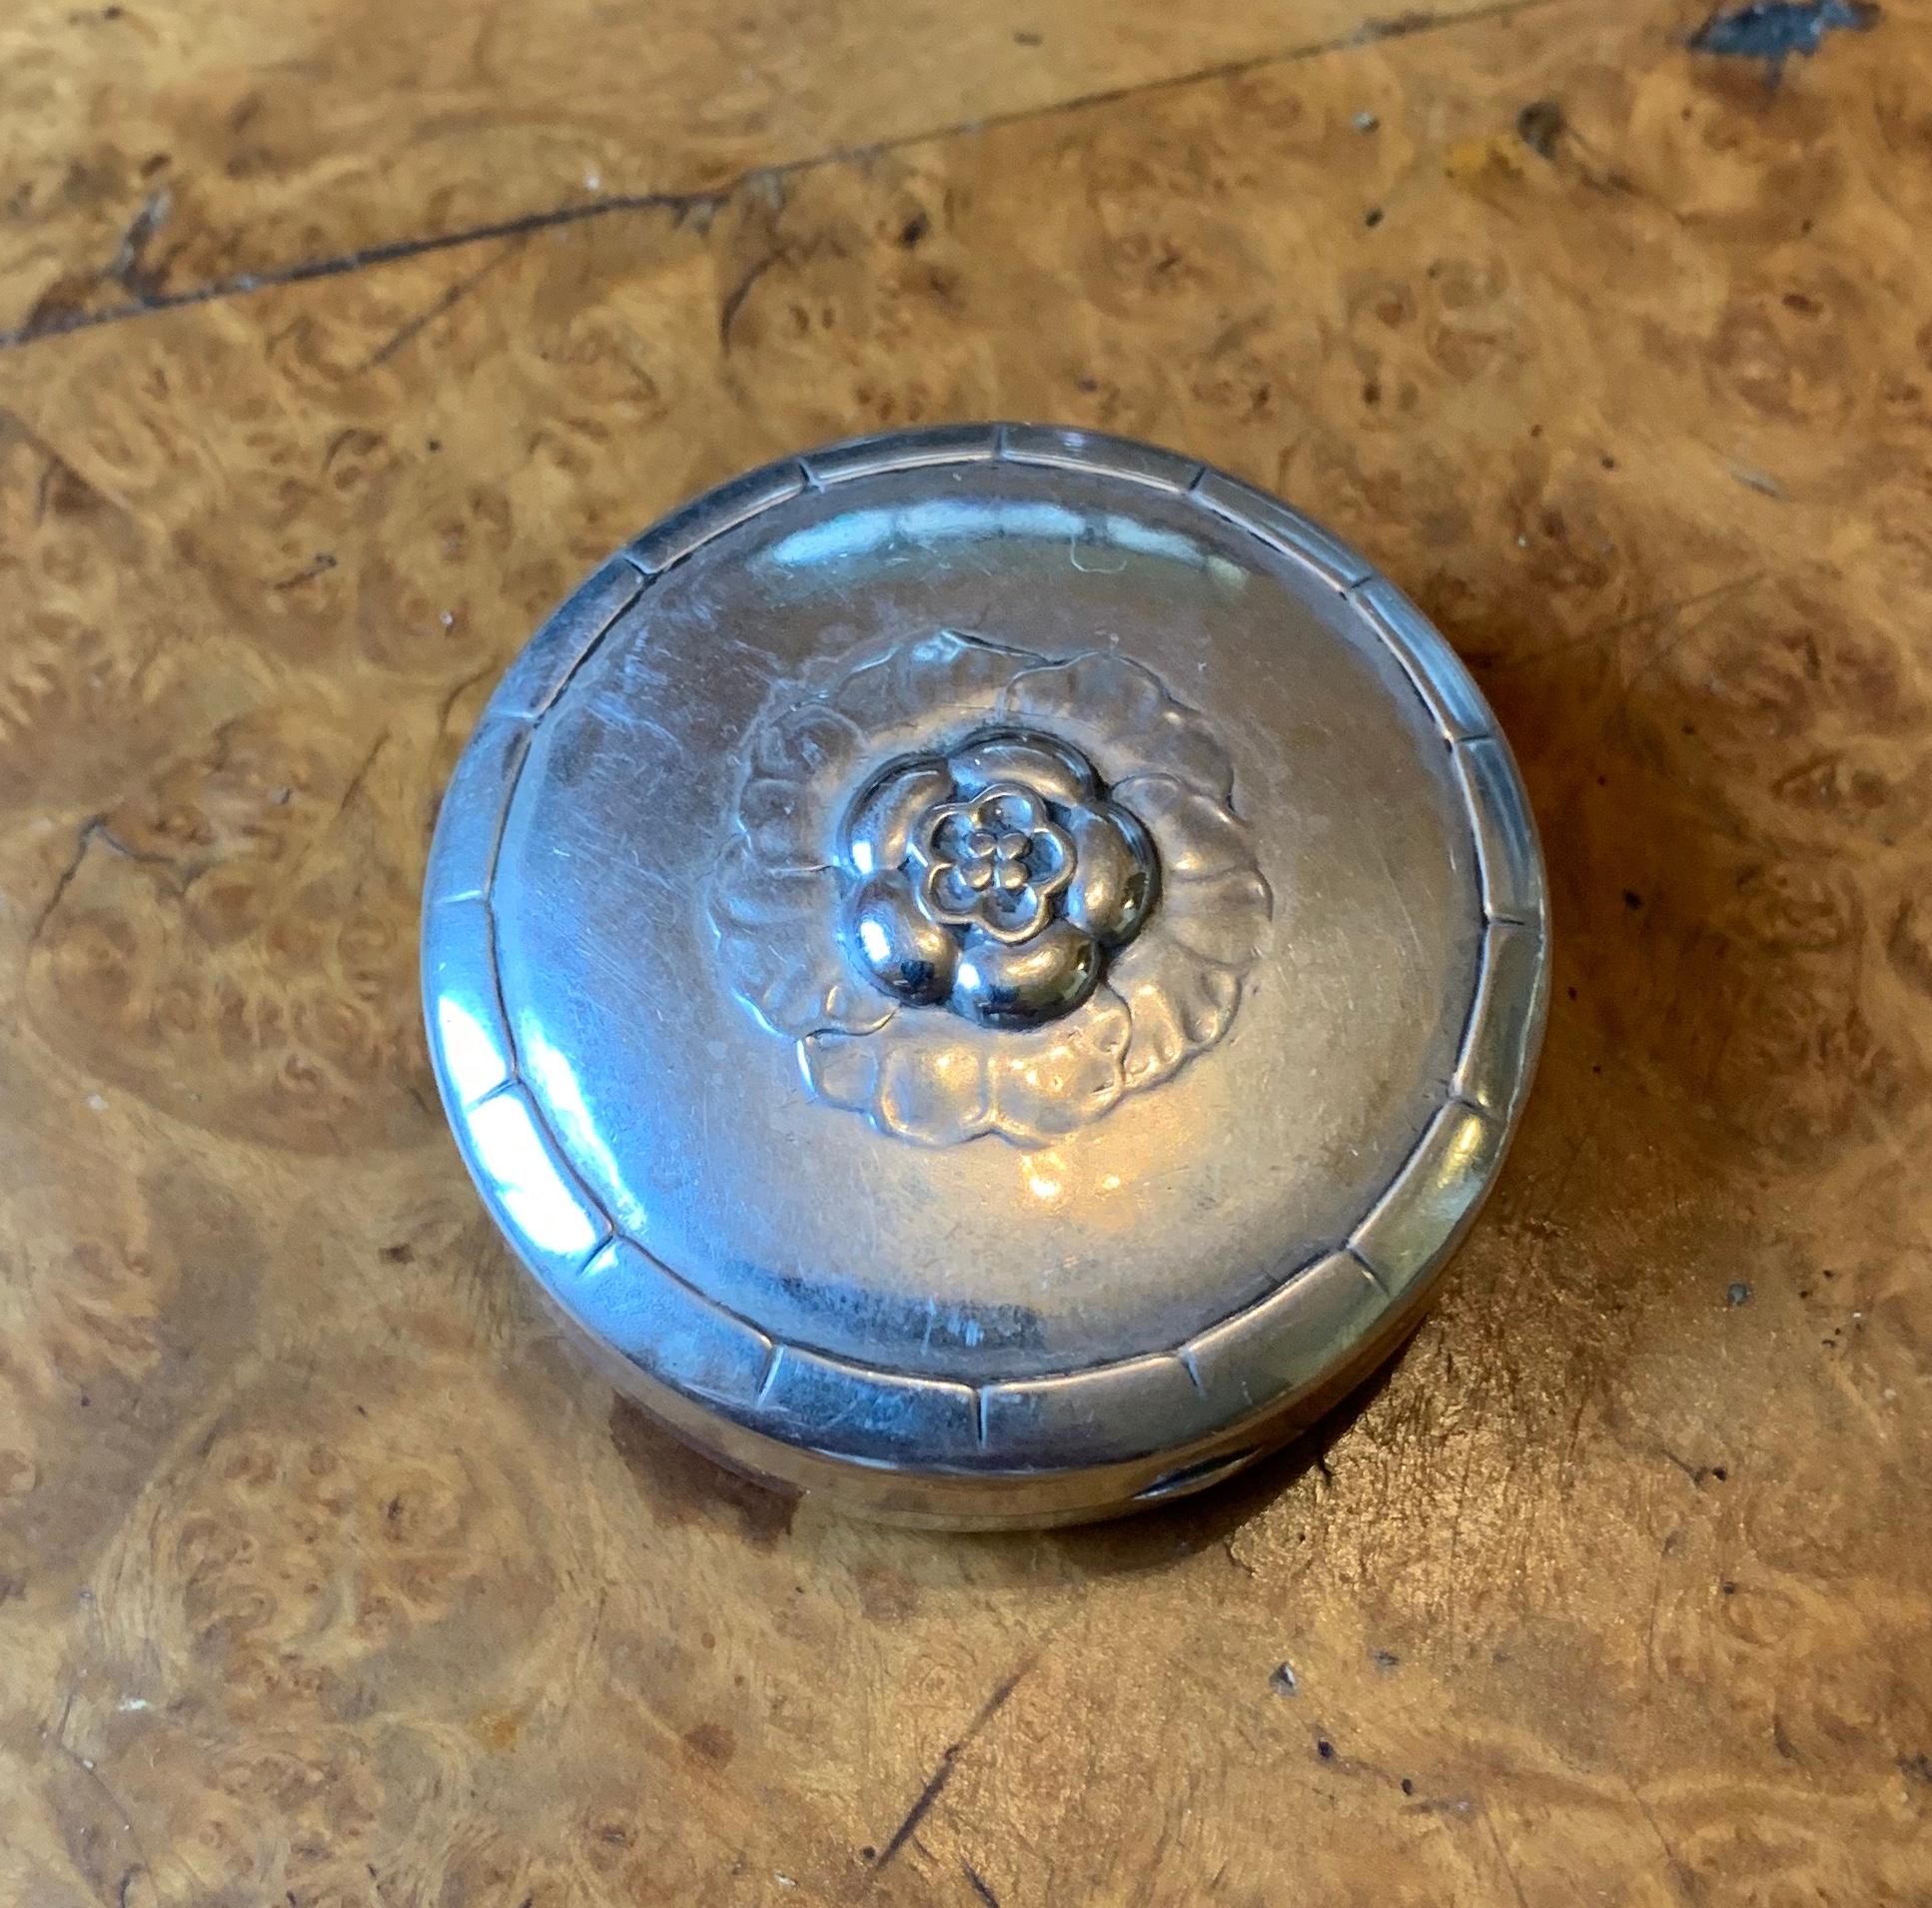 THIS IS A WONDERFUL AND RARE EARLY ORIGINAL GEORG JENSEN ART NOUVEAU DRESSER PILL JEWELRY RING BOX IN STERLING SILVER WITH A FLOWER MOTIF ON THE TOP.  This is an absolutely stunning rare early antique small silver dresser box by the master